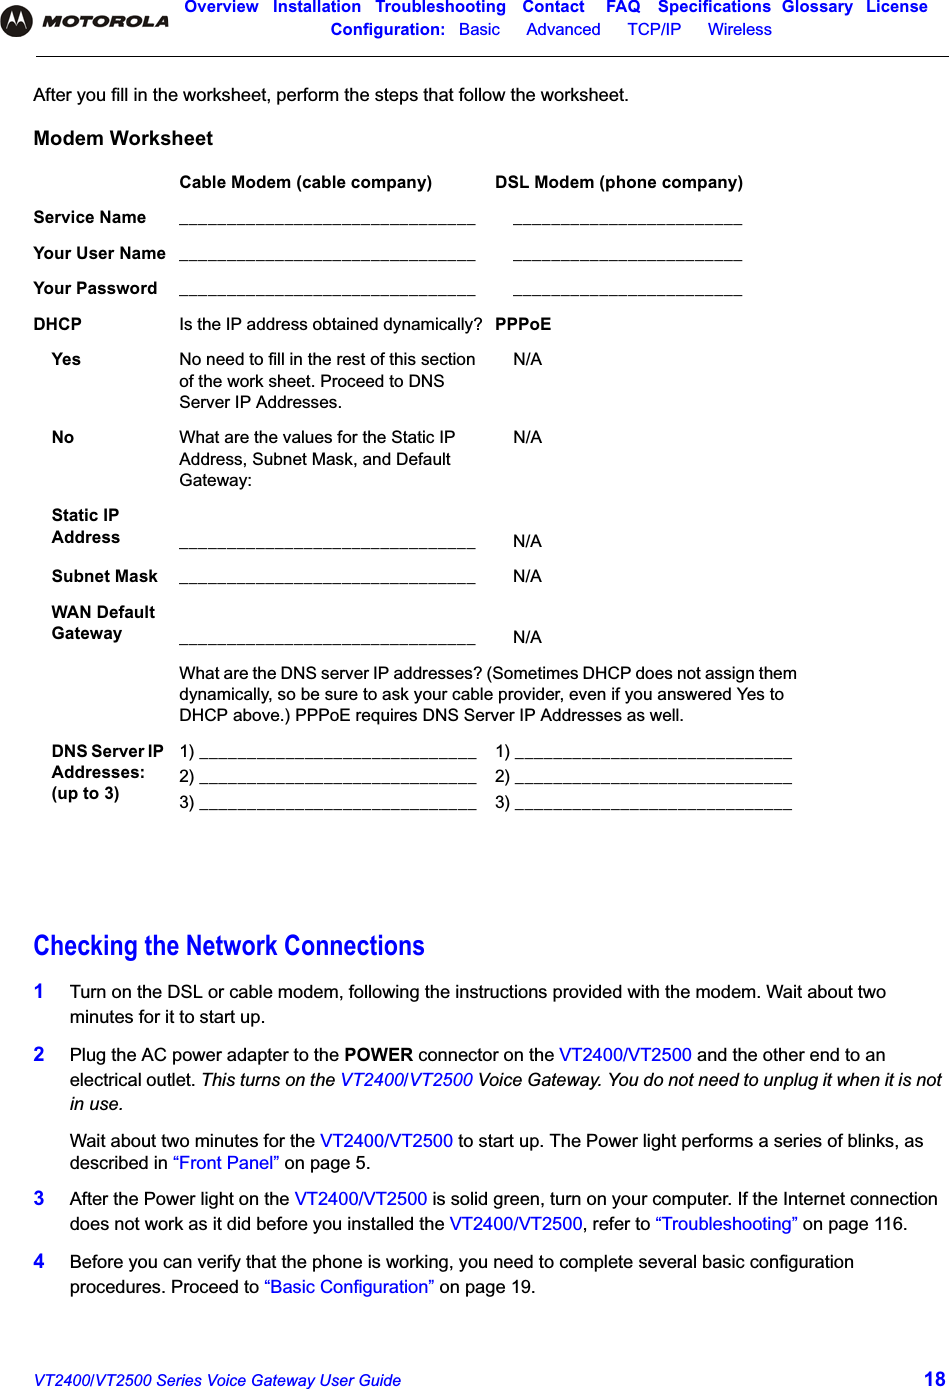 Overview Installation Troubleshooting Contact FAQ Specifications Glossary LicenseConfiguration:   Basic      Advanced      TCP/IP      Wireless VT2400/VT2500 Series Voice Gateway User Guide 18After you fill in the worksheet, perform the steps that follow the worksheet.Checking the Network Connections1Turn on the DSL or cable modem, following the instructions provided with the modem. Wait about two minutes for it to start up.2Plug the AC power adapter to the POWER connector on the VT2400/VT2500 and the other end to an electrical outlet. This turns on the VT2400/VT2500 Voice Gateway. You do not need to unplug it when it is not in use. Wait about two minutes for the VT2400/VT2500 to start up. The Power light performs a series of blinks, as described in “Front Panel” on page 5.3After the Power light on the VT2400/VT2500 is solid green, turn on your computer. If the Internet connection does not work as it did before you installed the VT2400/VT2500, refer to “Troubleshooting” on page 116.4Before you can verify that the phone is working, you need to complete several basic configuration procedures. Proceed to “Basic Configuration” on page 19.Modem WorksheetCable Modem (cable company) DSL Modem (phone company)Service Name _______________________________ ________________________Your User Name _______________________________ ________________________Your Password _______________________________ ________________________DHCP  Is the IP address obtained dynamically? PPPoE Yes No need to fill in the rest of this section of the work sheet. Proceed to DNS Server IP Addresses.N/ANo What are the values for the Static IP Address, Subnet Mask, and Default Gateway:N/AStatic IP Address _______________________________ N/ASubnet Mask _______________________________ N/AWAN Default Gateway _______________________________ N/AWhat are the DNS server IP addresses? (Sometimes DHCP does not assign them dynamically, so be sure to ask your cable provider, even if you answered Yes to DHCP above.) PPPoE requires DNS Server IP Addresses as well.DNS Server IP Addresses: (up to 3)1) _____________________________2) _____________________________3) _____________________________1) _____________________________2) _____________________________3) _____________________________